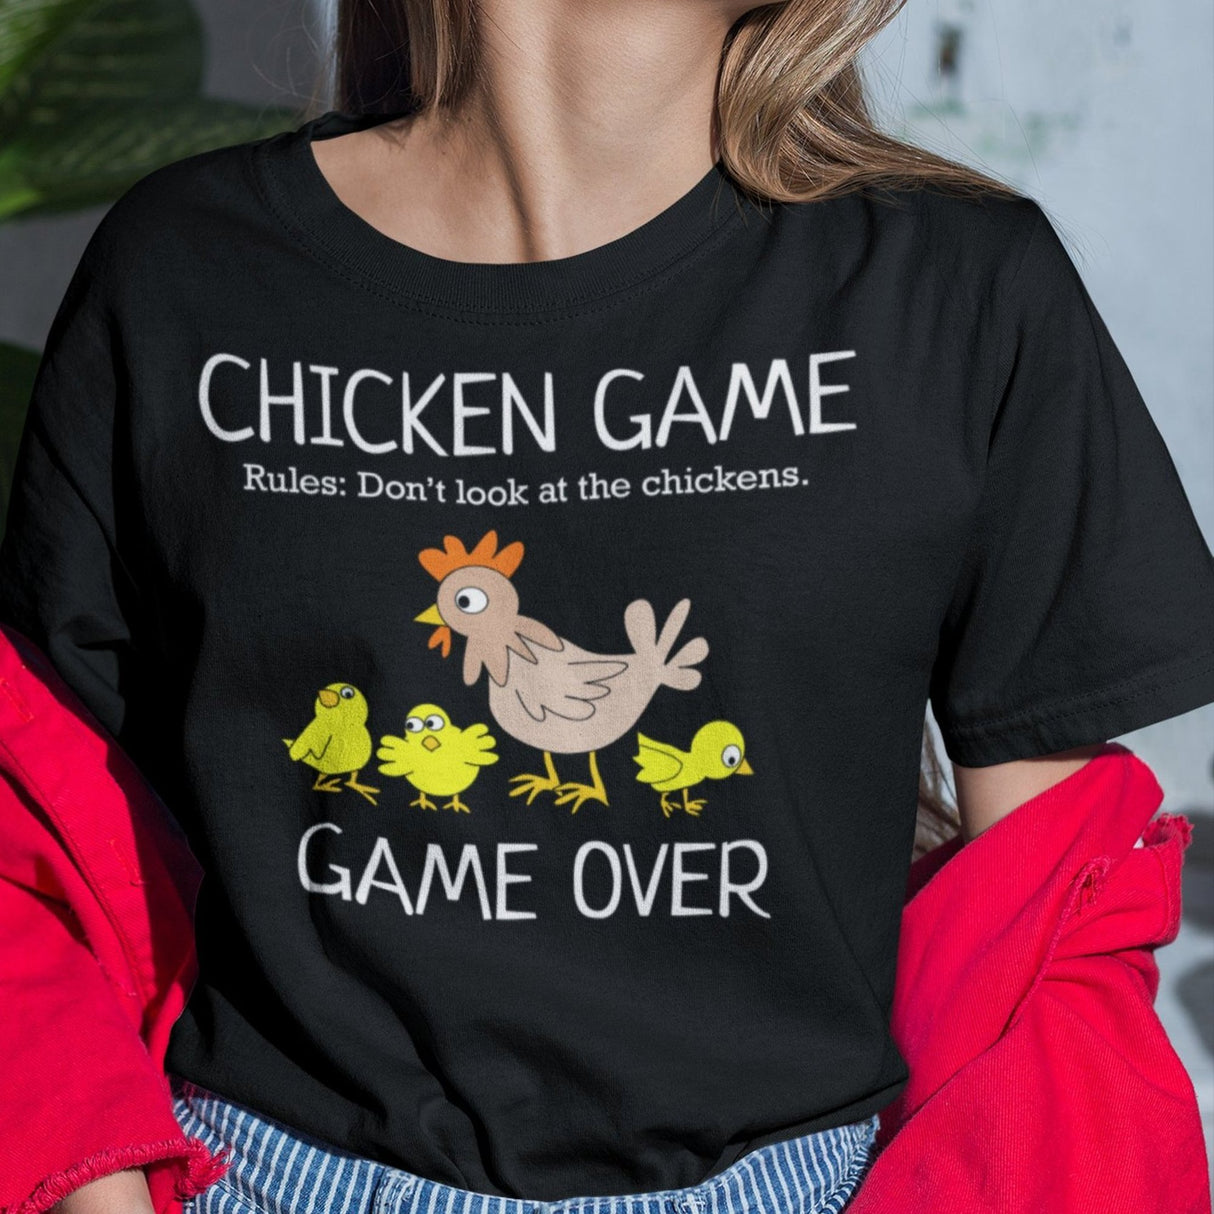 chicken-game-rules-dont-look-at-the-chickens-game-over-chicken-tee-game-t-shirt-look-tee-vote-t-shirt-election-tee#color_black